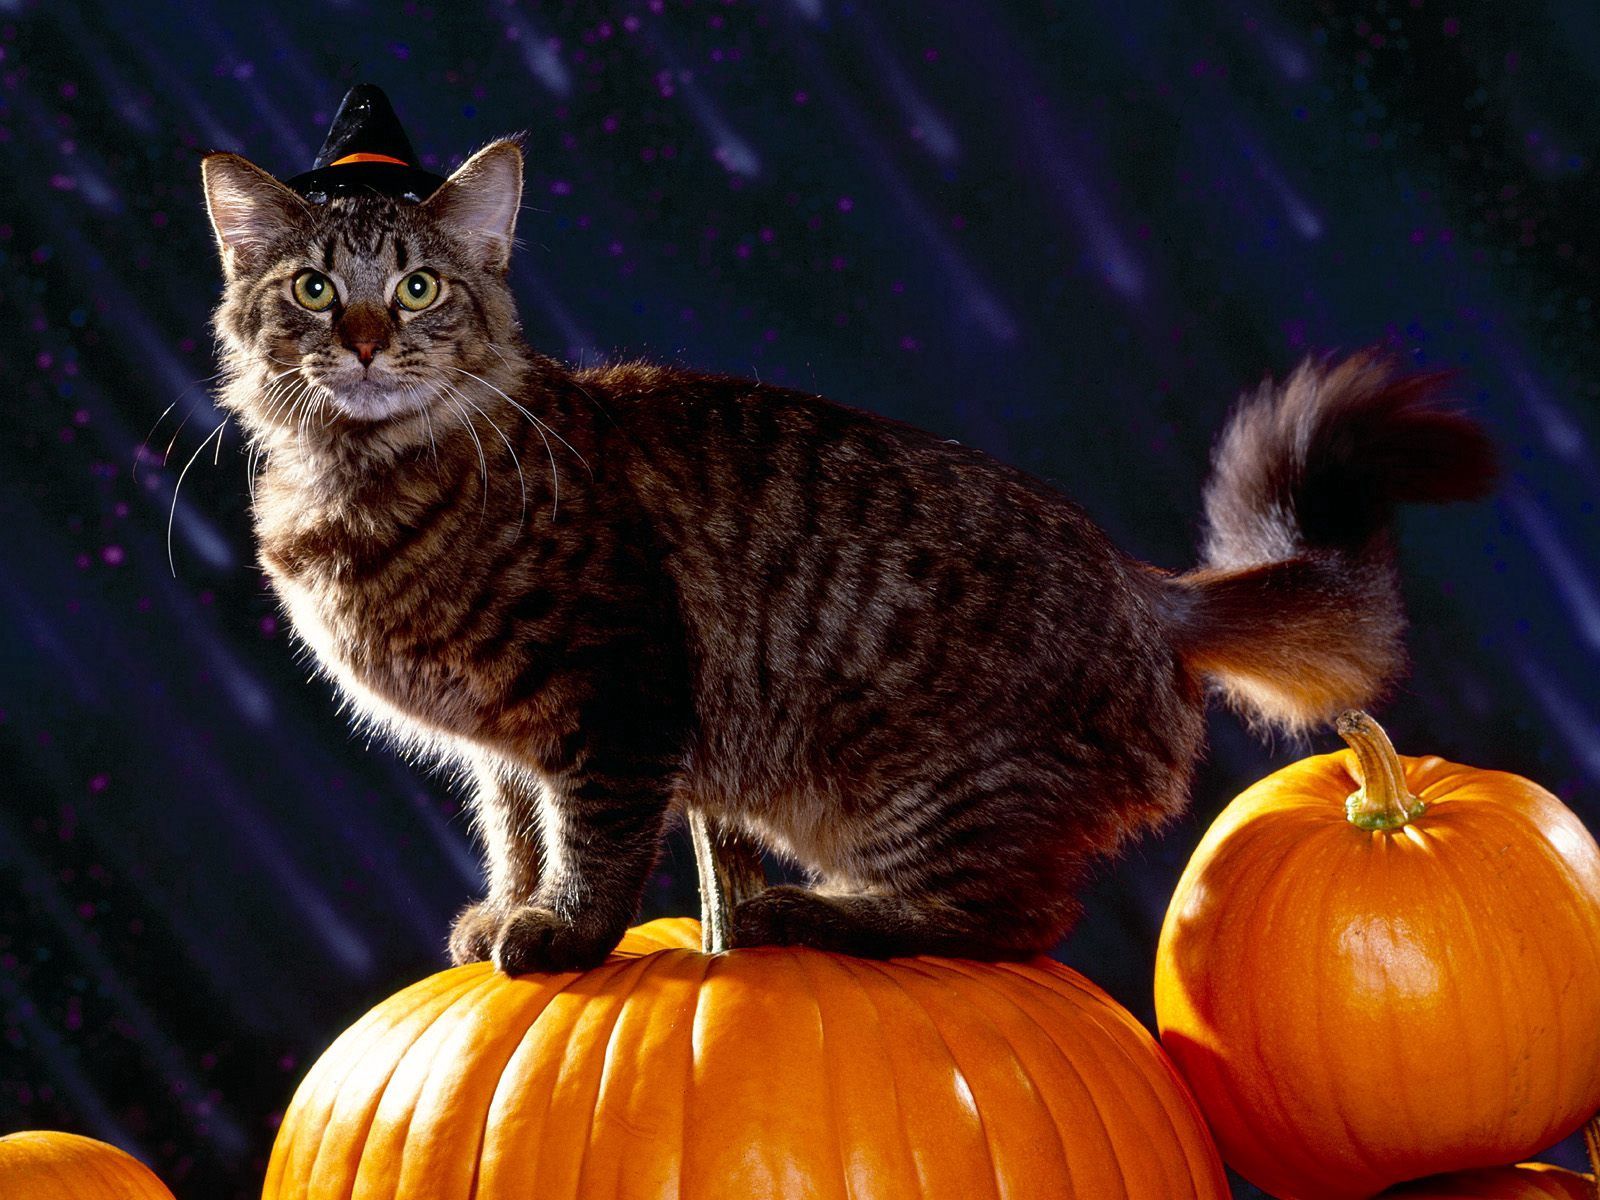 Mobile wallpaper: Animals, Halloween, Pumpkin, Cat, Fluffy, 90061 download the picture for free